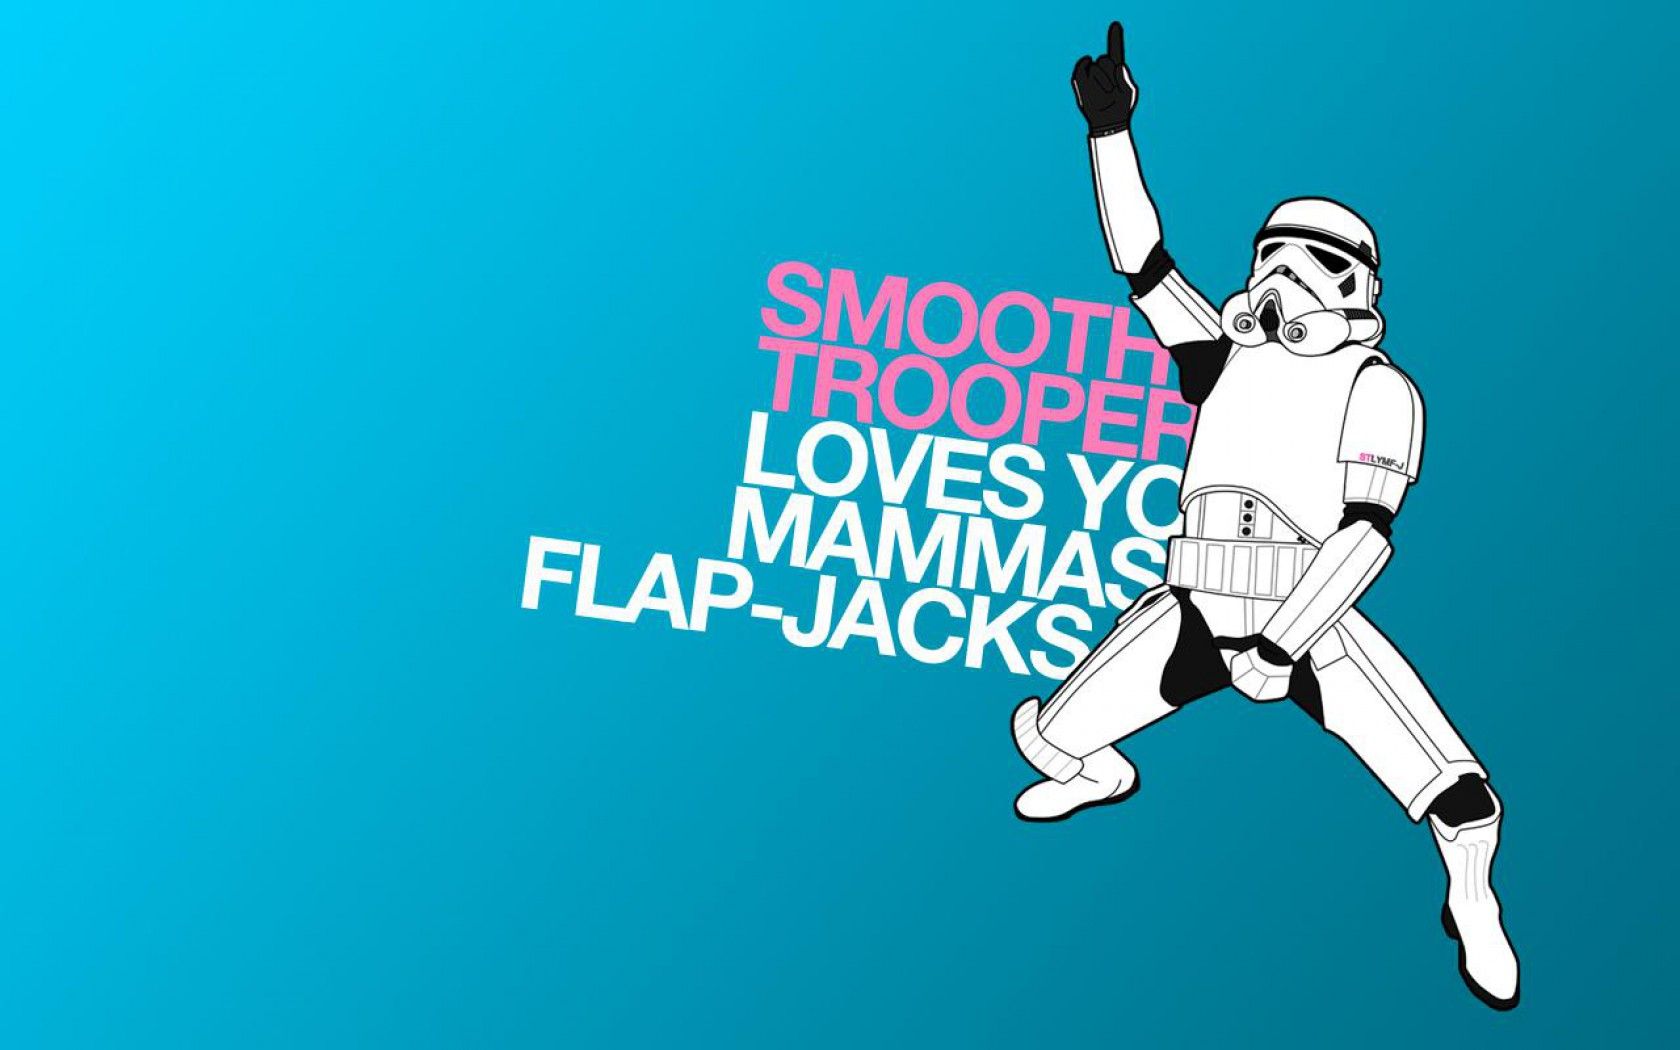 silly storm trooper Cool wallpapers backgrounds Really cool